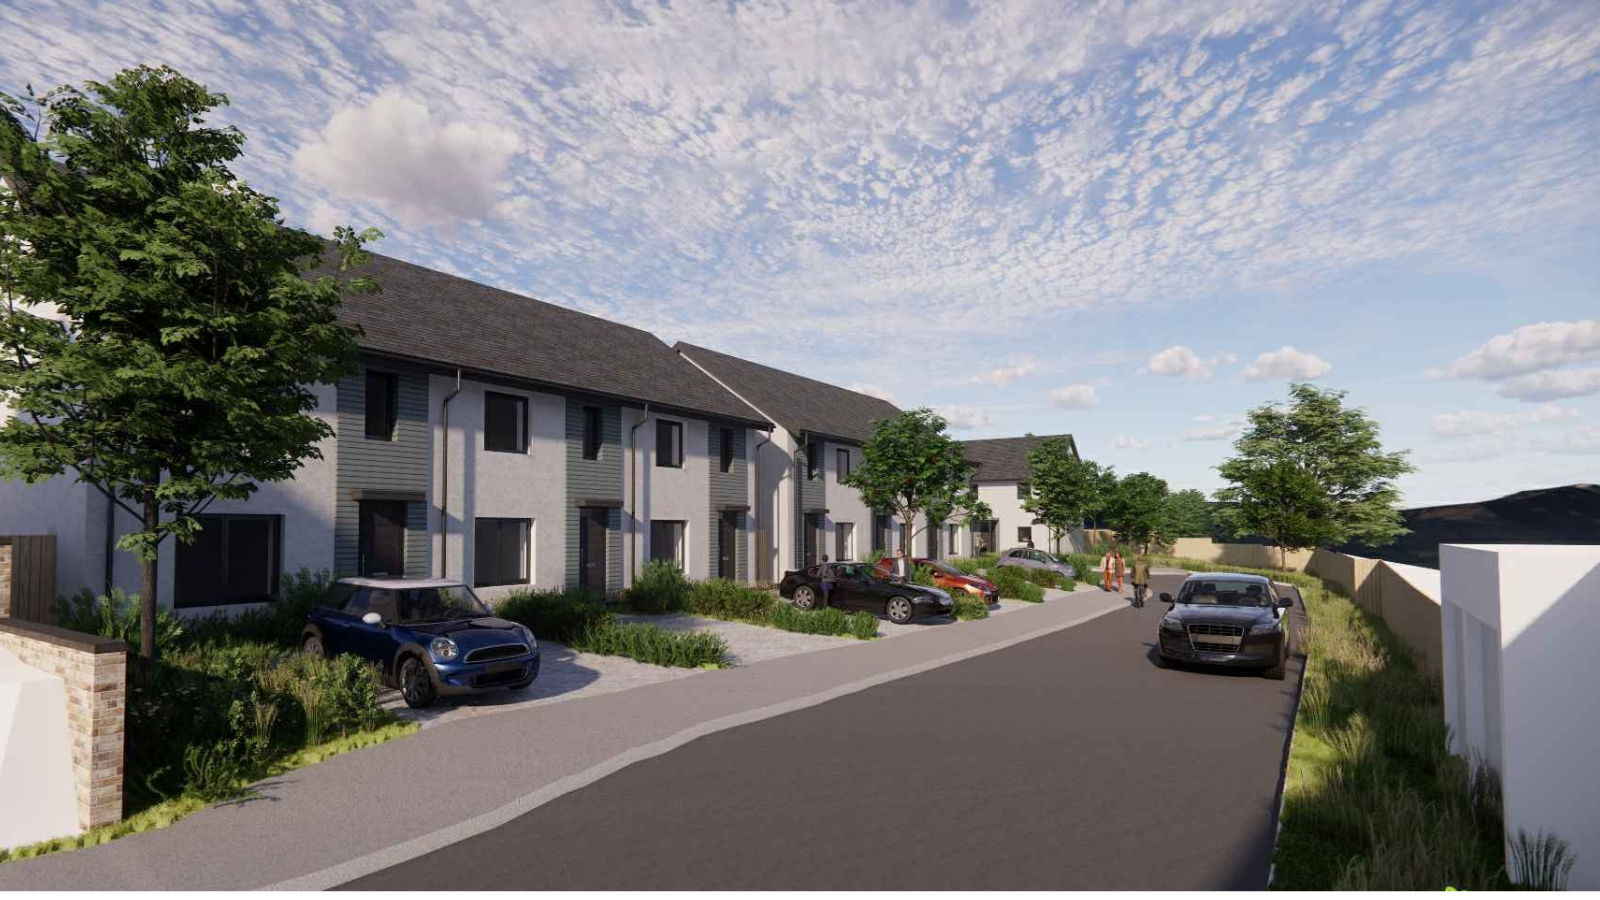 Trivallis Housing Landlord Wales A rendered image of modern Trivallis housing on a residential street with a row of two-story houses, cars parked outside, and a clear blue sky with scattered clouds overhead.